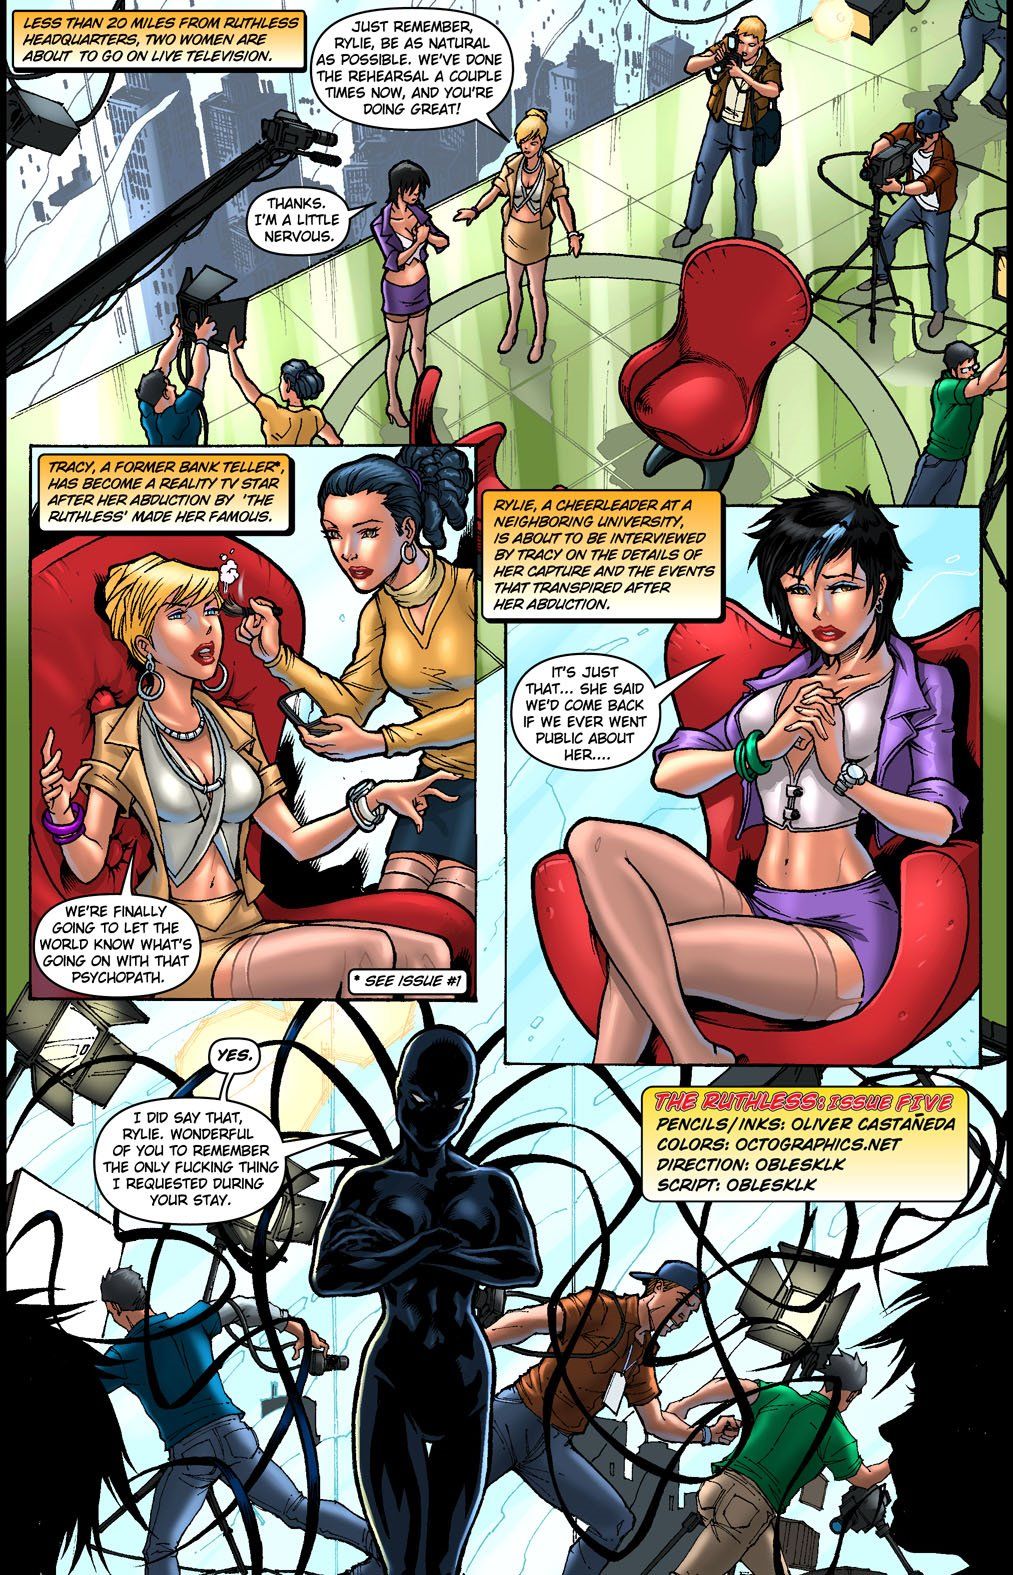 The Ruthless Issue 5 page 2